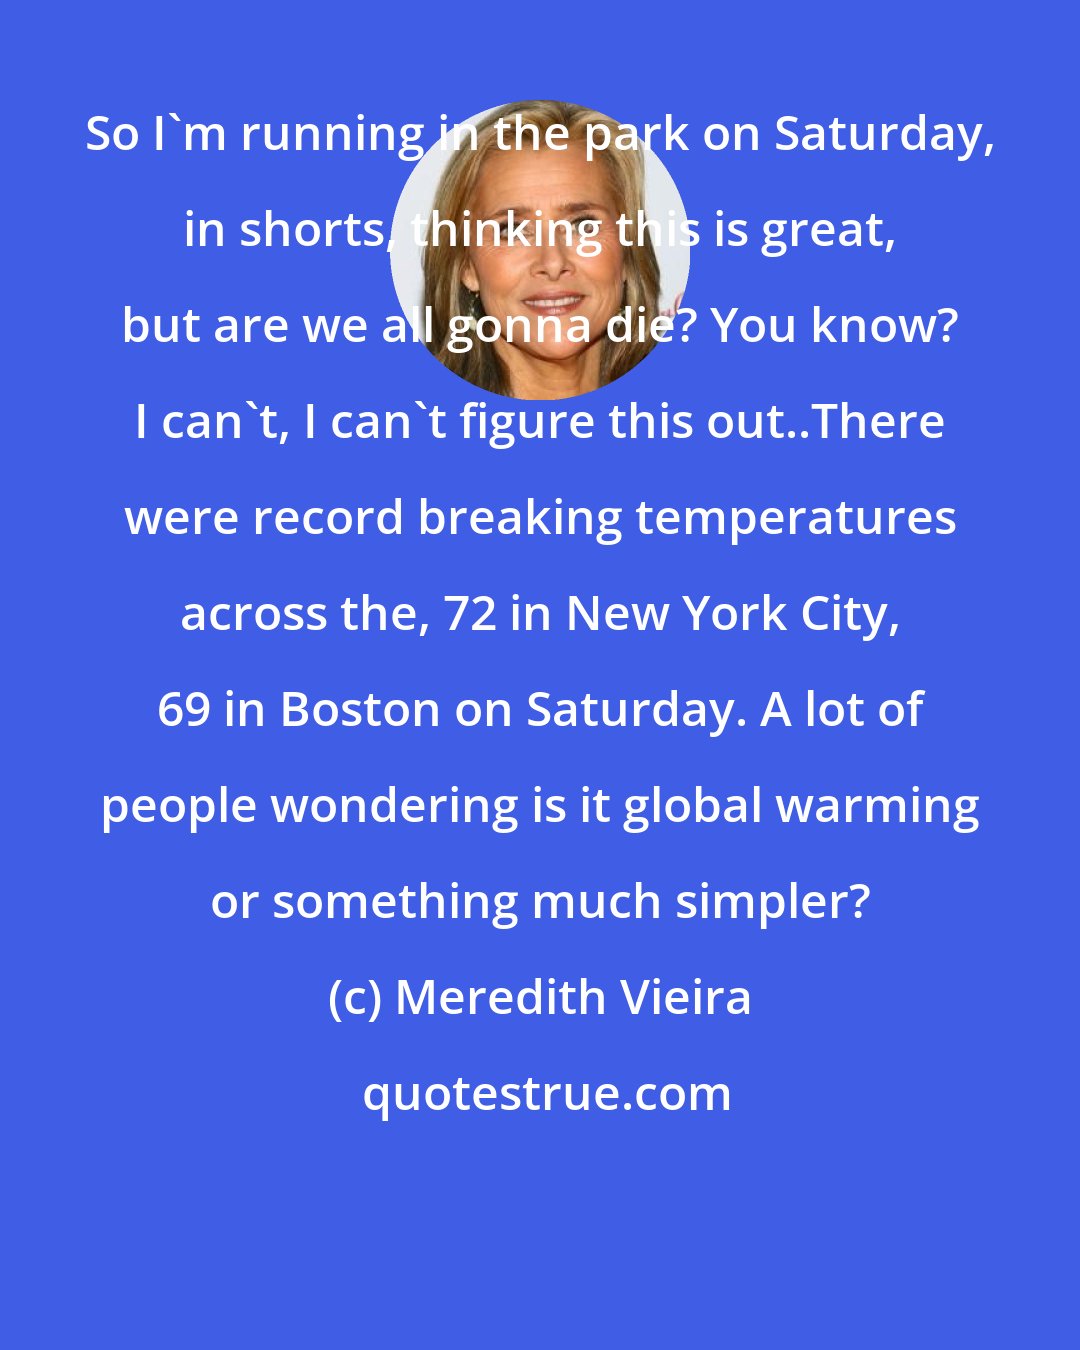 Meredith Vieira: So I'm running in the park on Saturday, in shorts, thinking this is great, but are we all gonna die? You know? I can't, I can't figure this out..There were record breaking temperatures across the, 72 in New York City, 69 in Boston on Saturday. A lot of people wondering is it global warming or something much simpler?